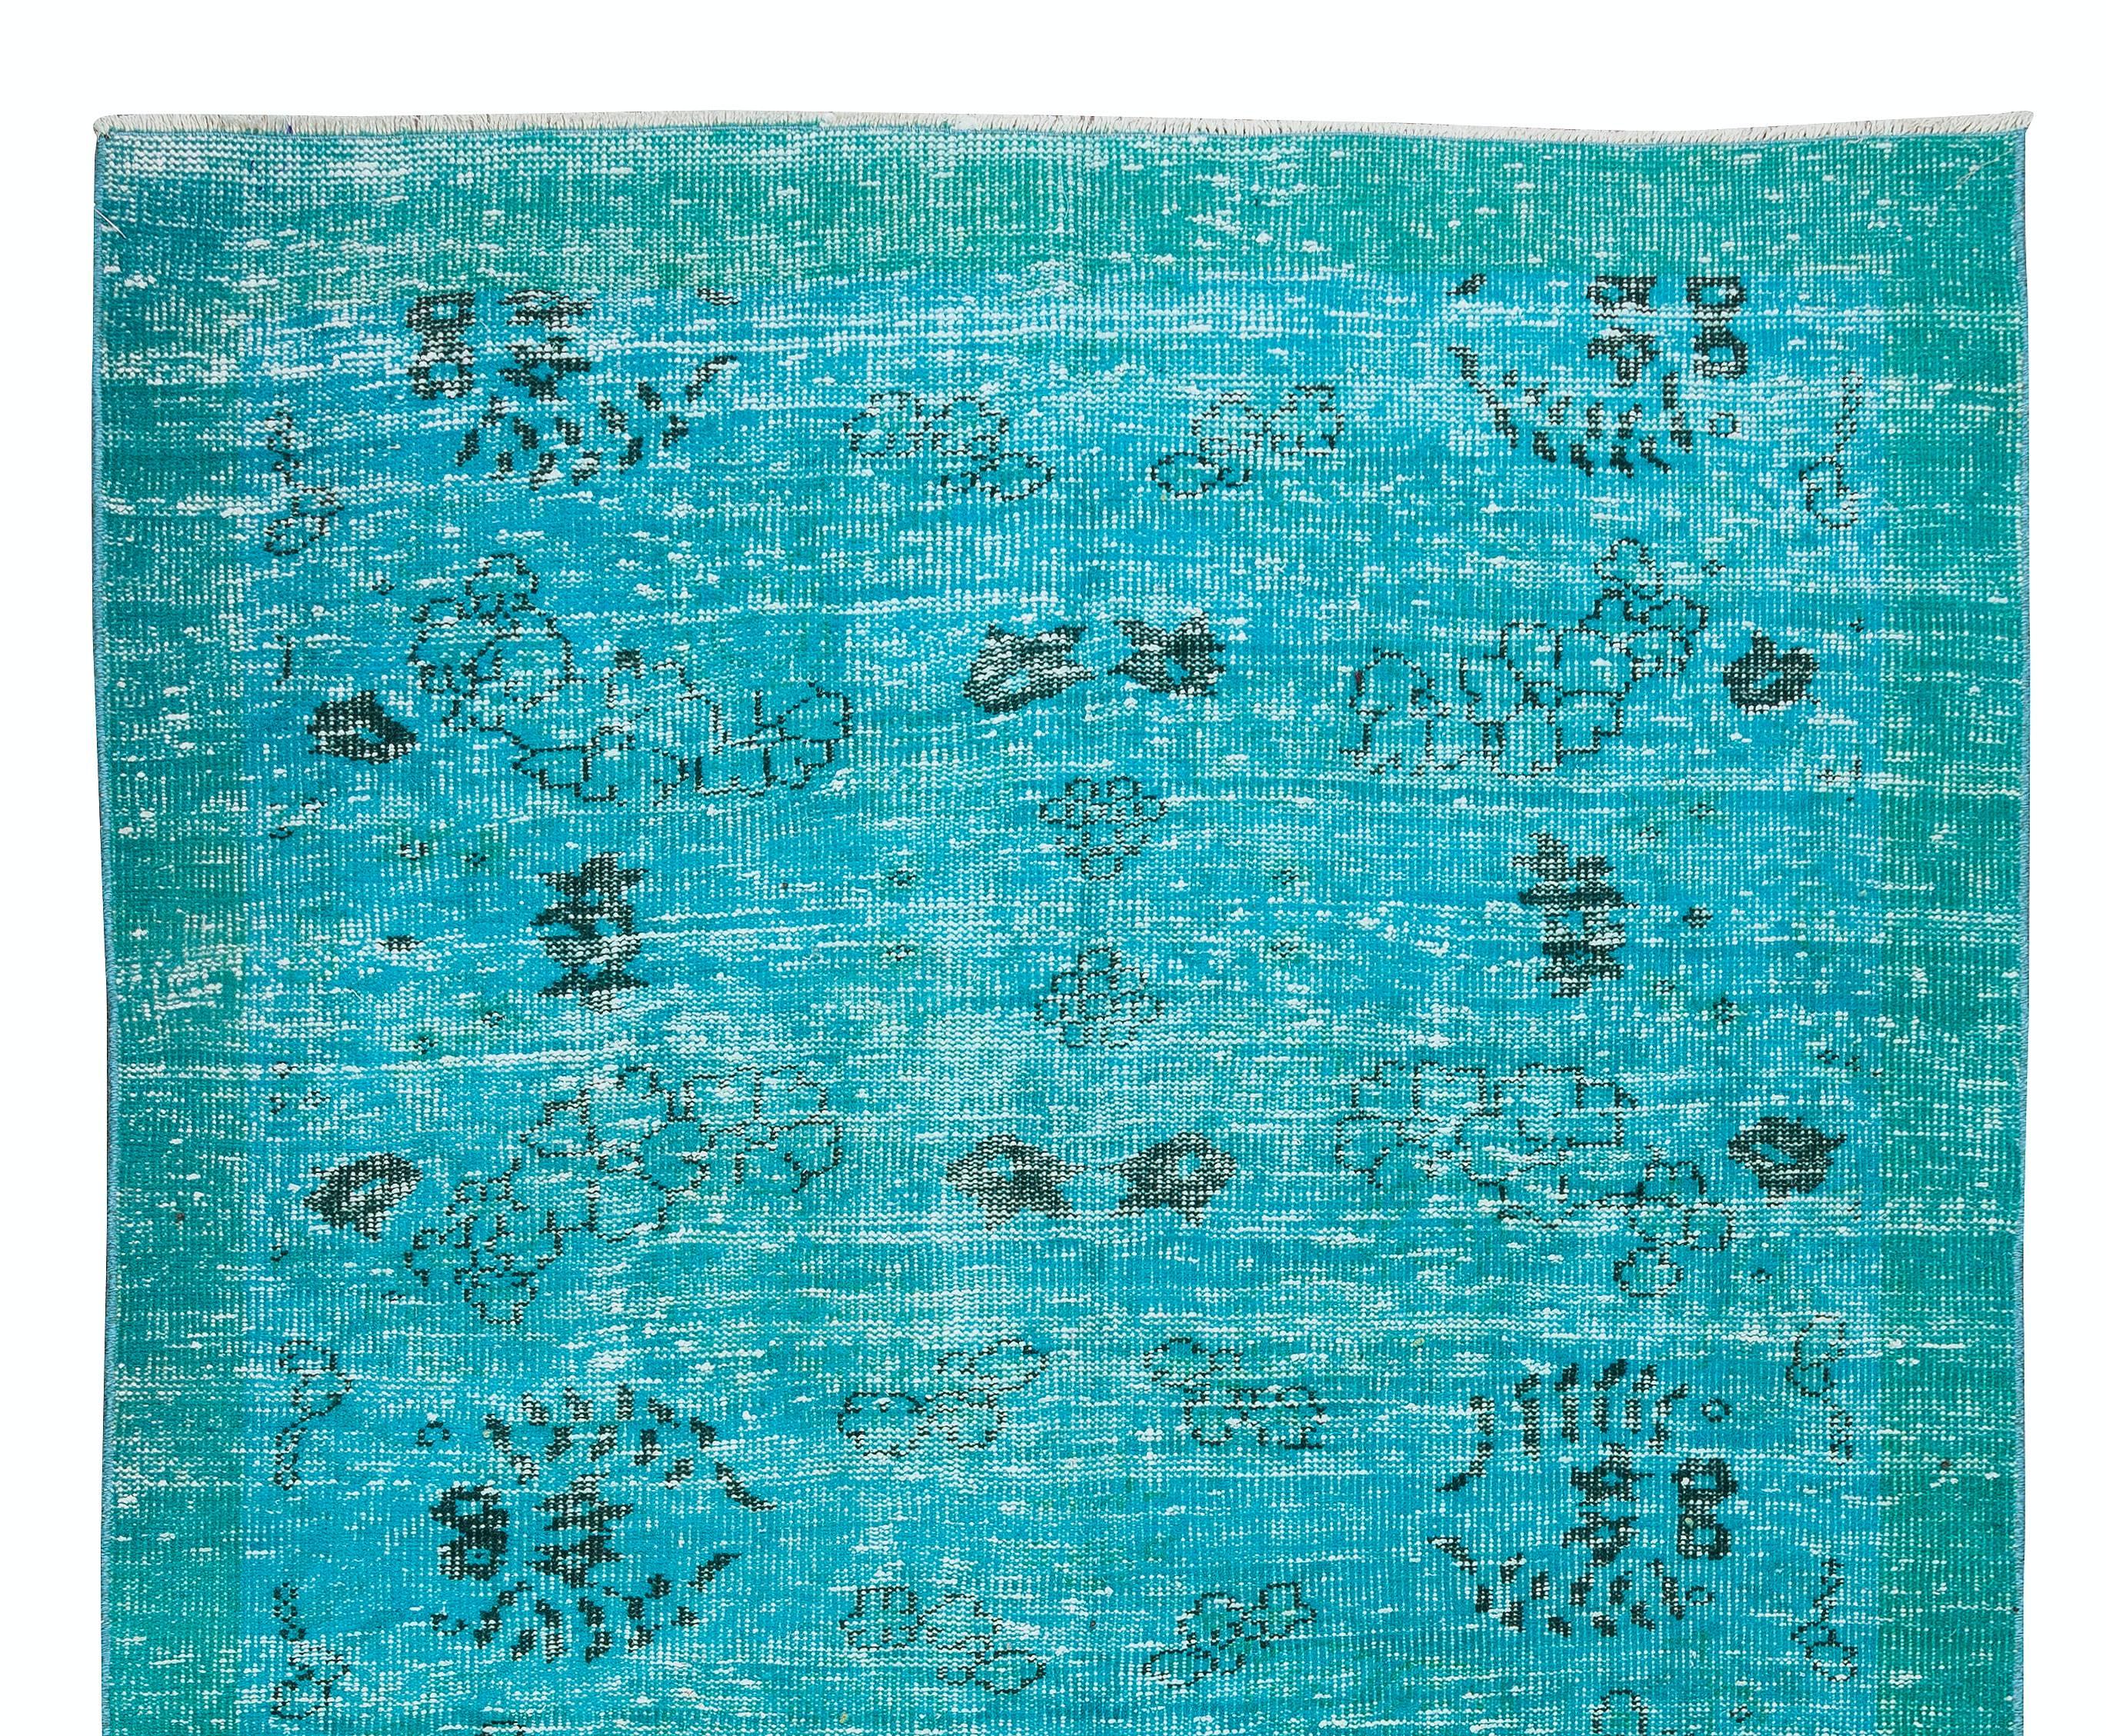 Hand-Woven 5.2x8.6 Ft Modern Handmade Rug. Vintage Anatolian Carpet Over-Dyed in Teal Blue